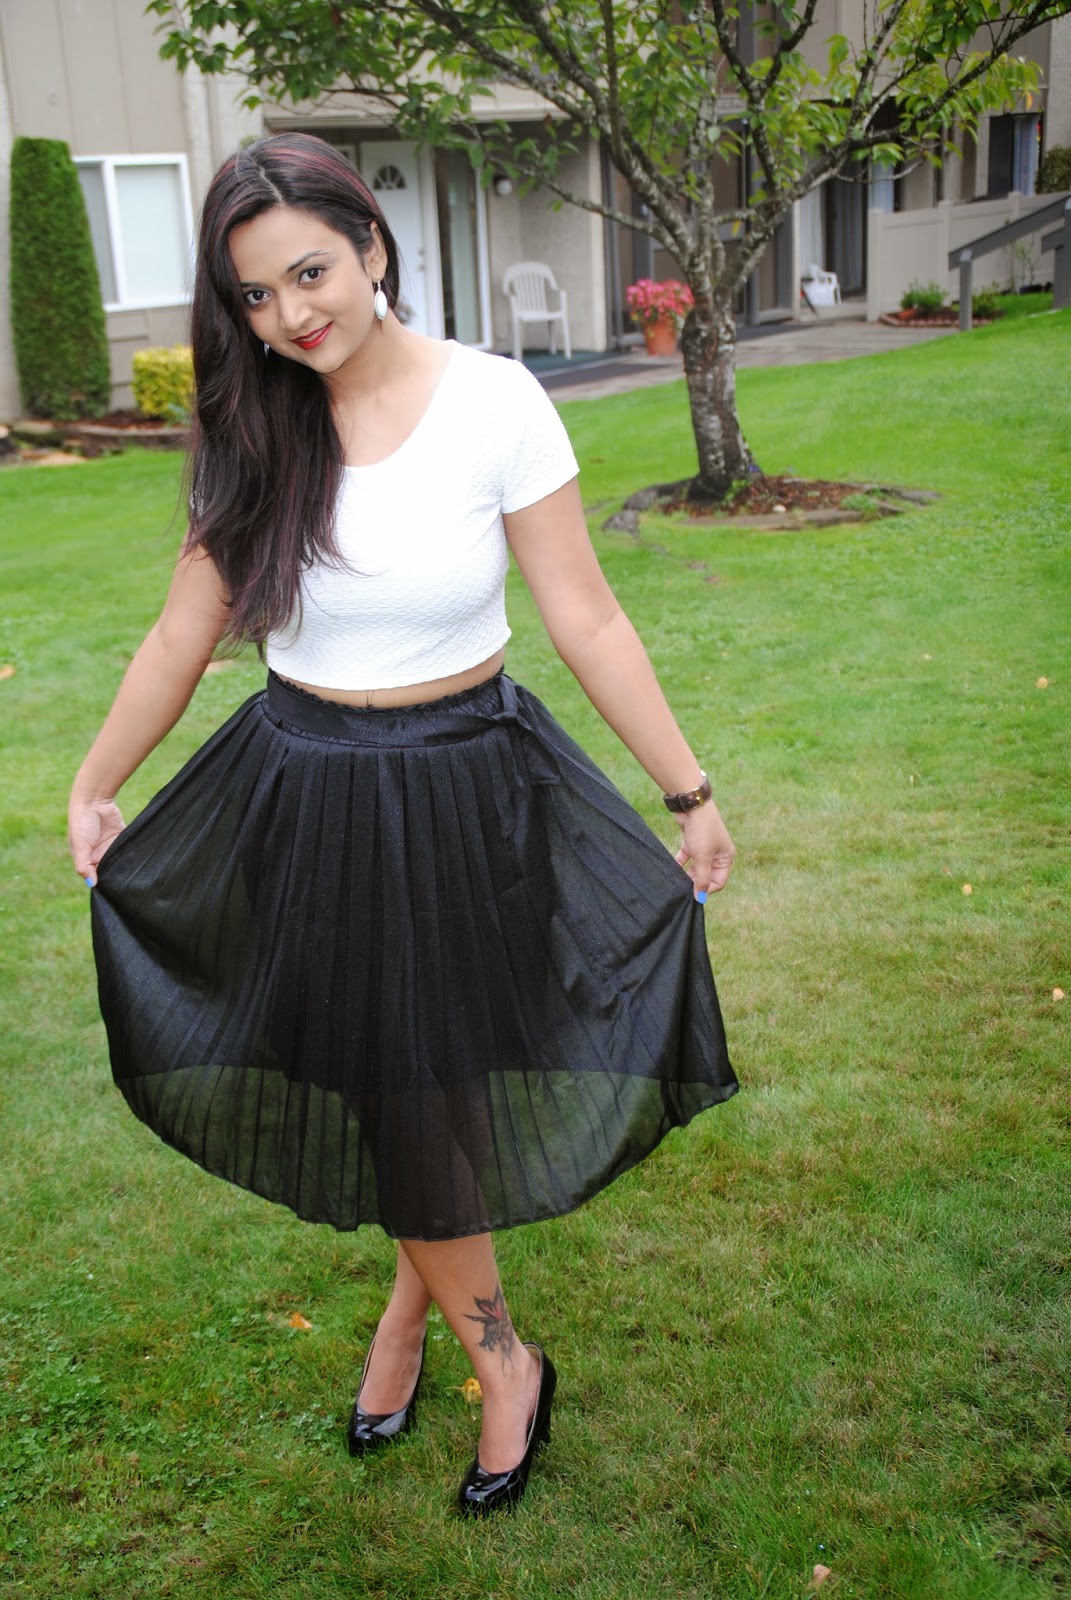 How to style a black skirt in different wyas, Ananya in a skirt, Ananya Kiran, Styling tips for Indian Women, Black skirt with white top, style tips for fall